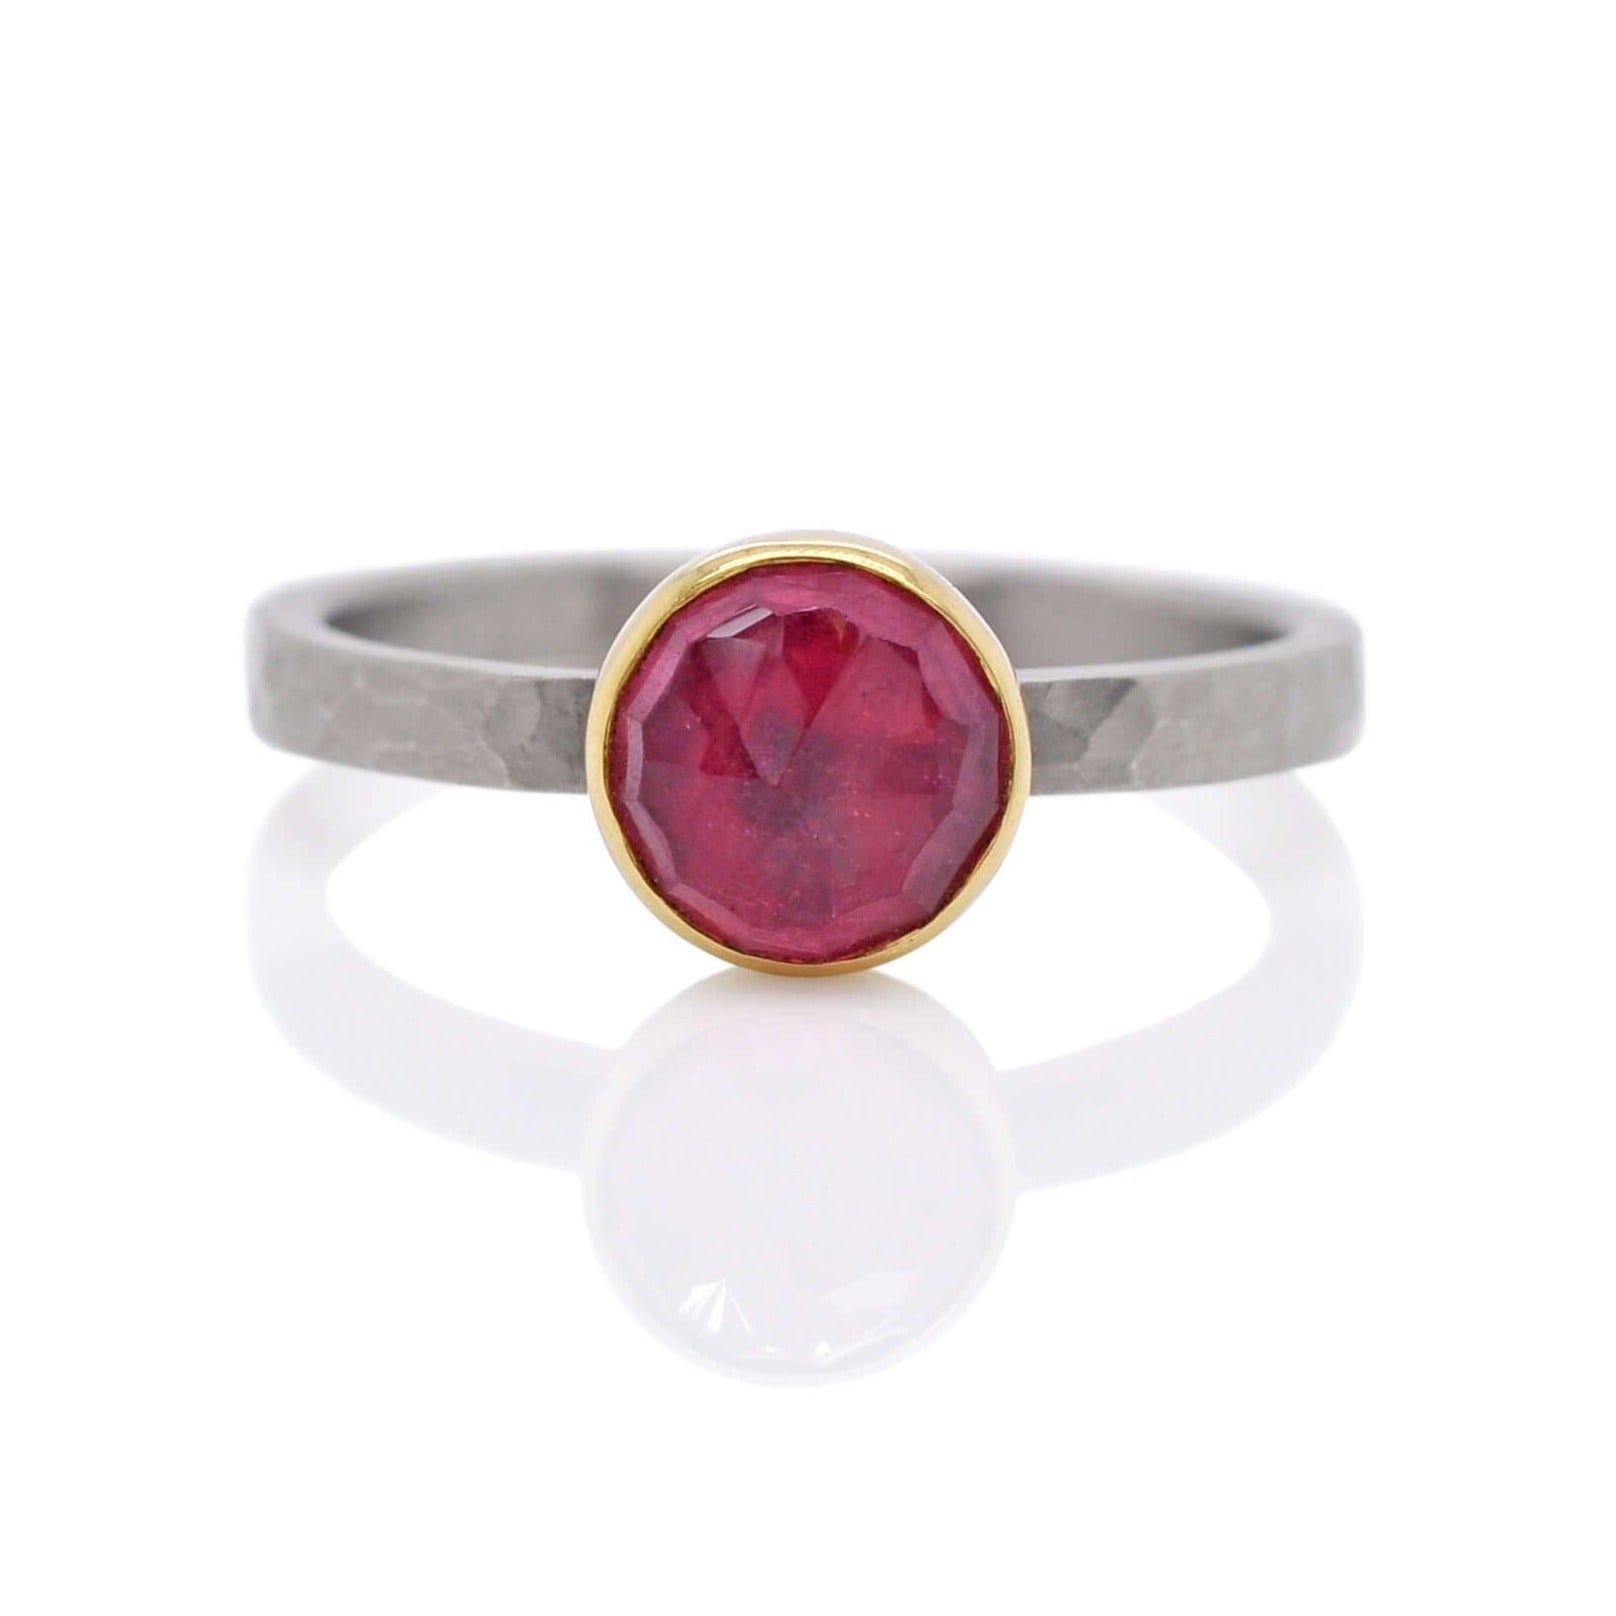 Pink rose cut sapphire ring in palladium and yellow gold. Handmade by EC Design Jewelry in Minneapolis, MN.